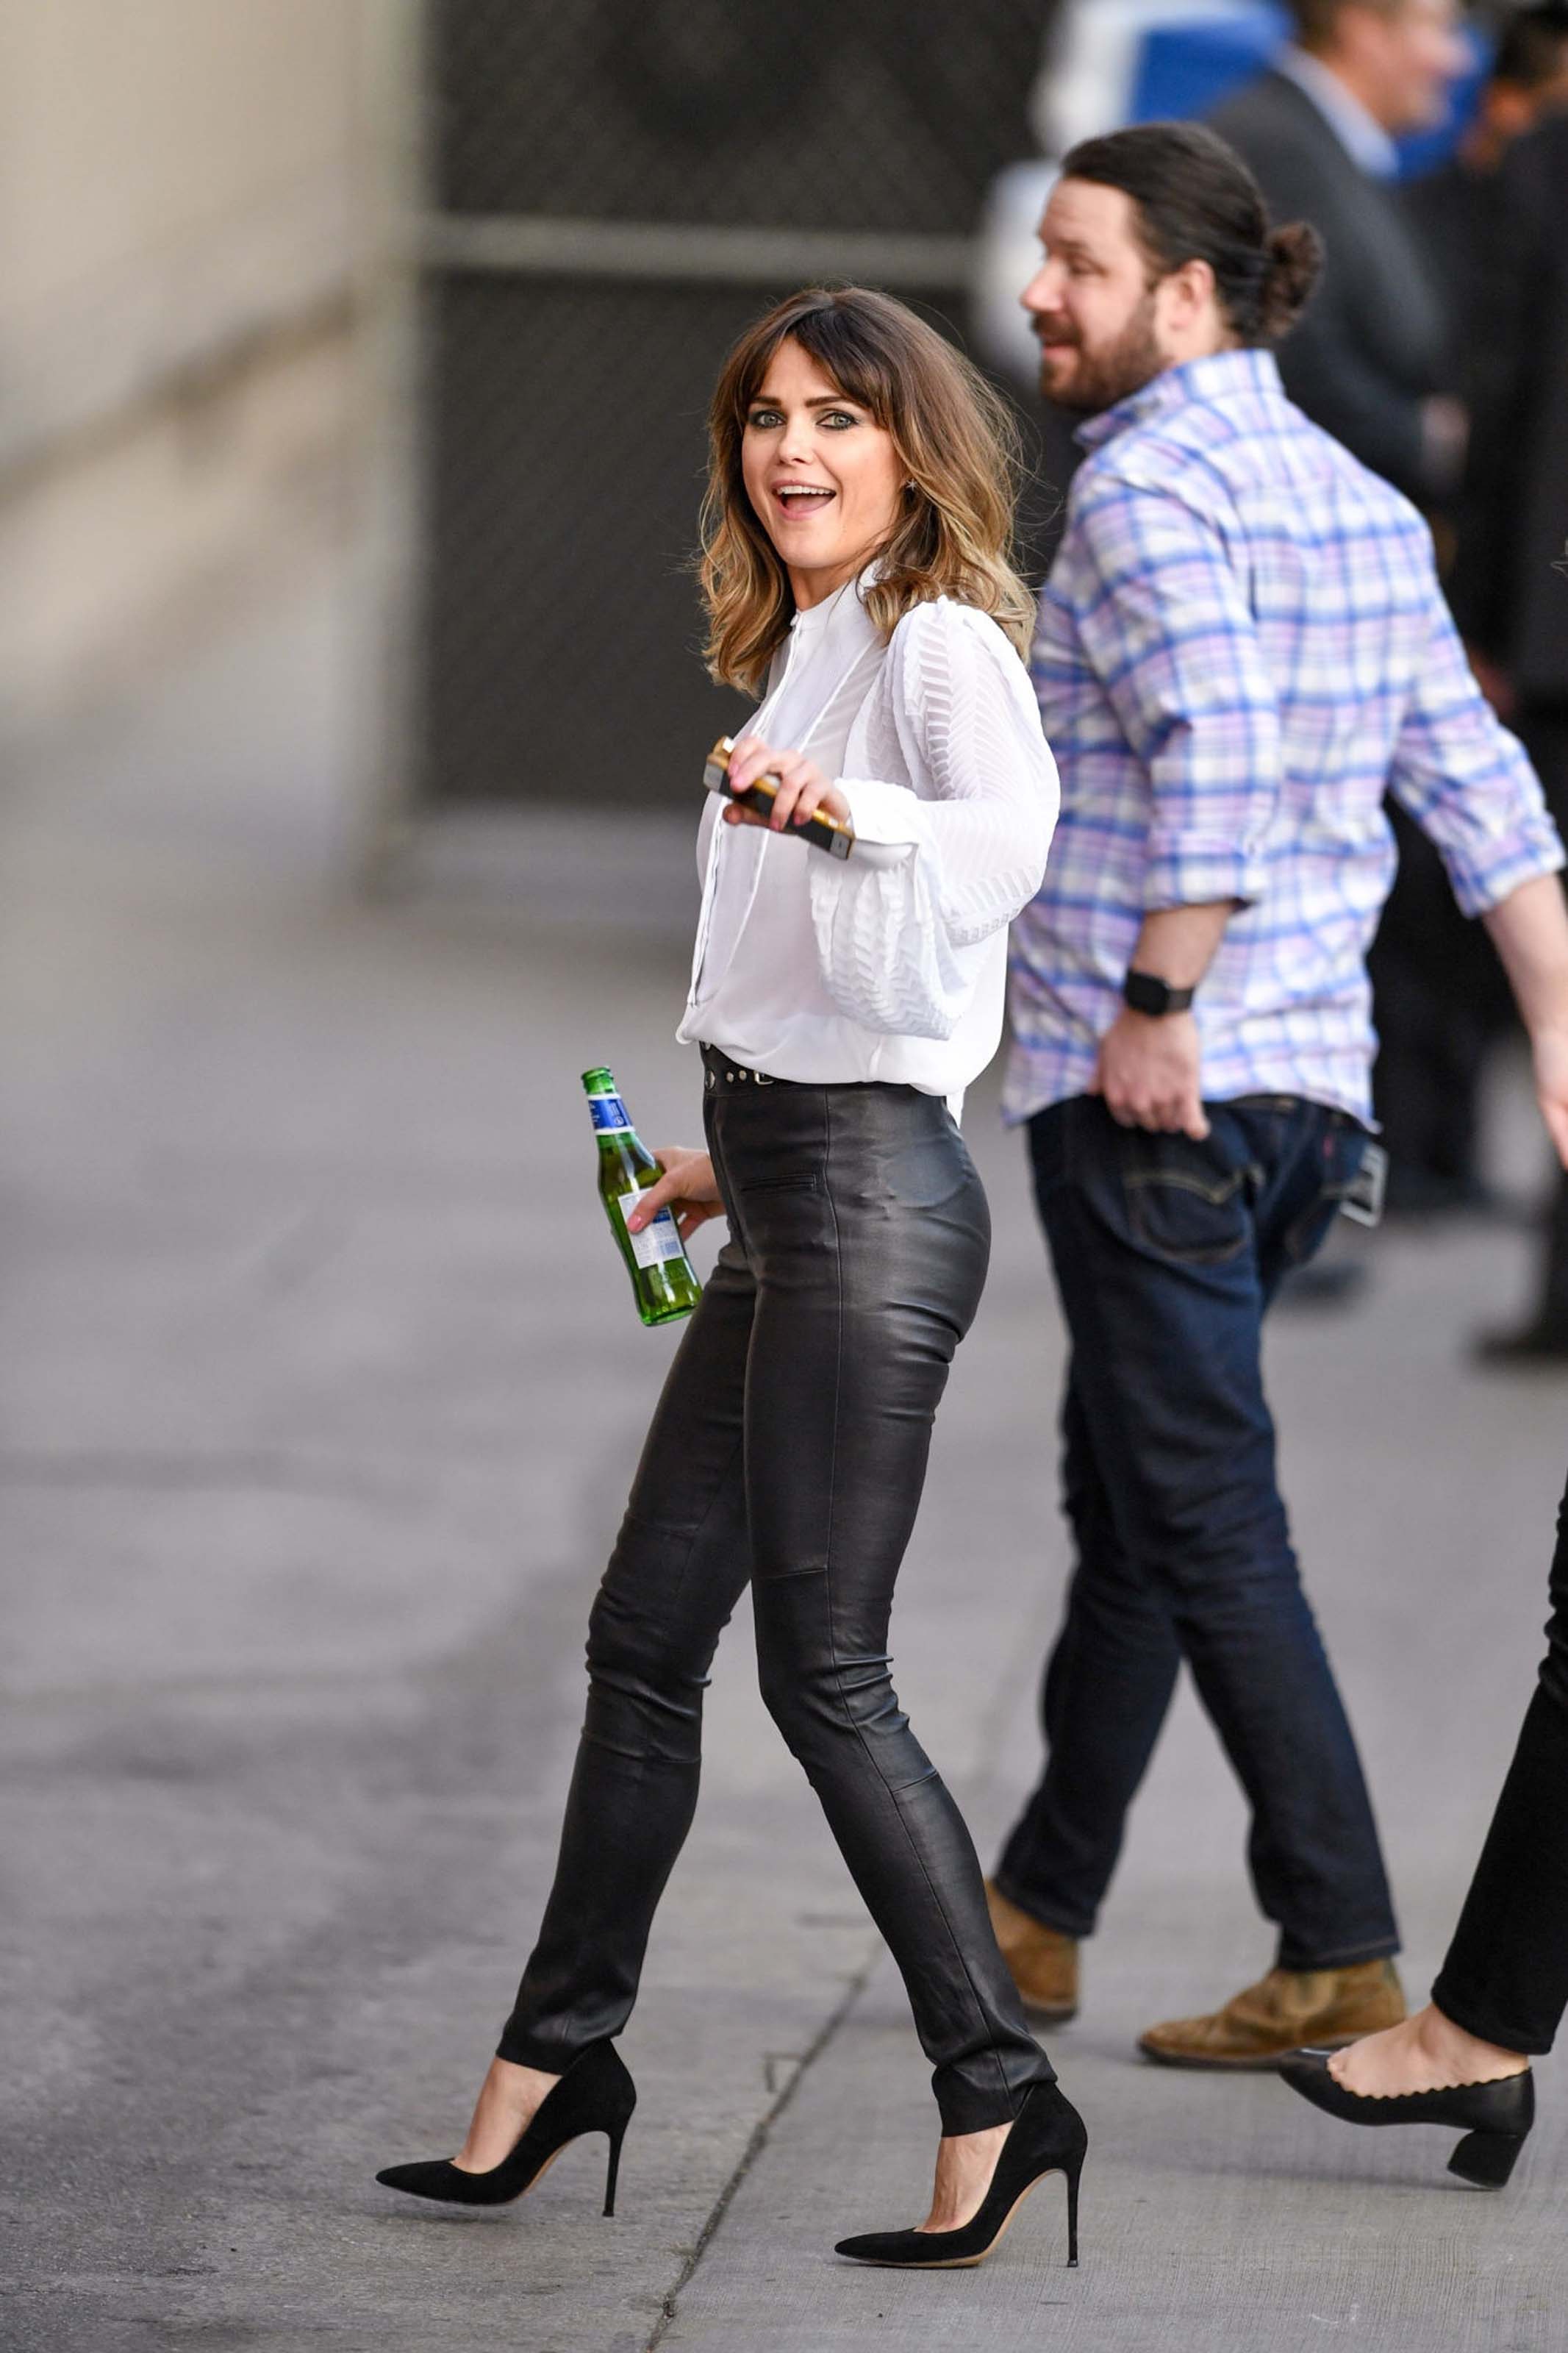 Keri Russell arriving at the Jimmy Kimmel Live